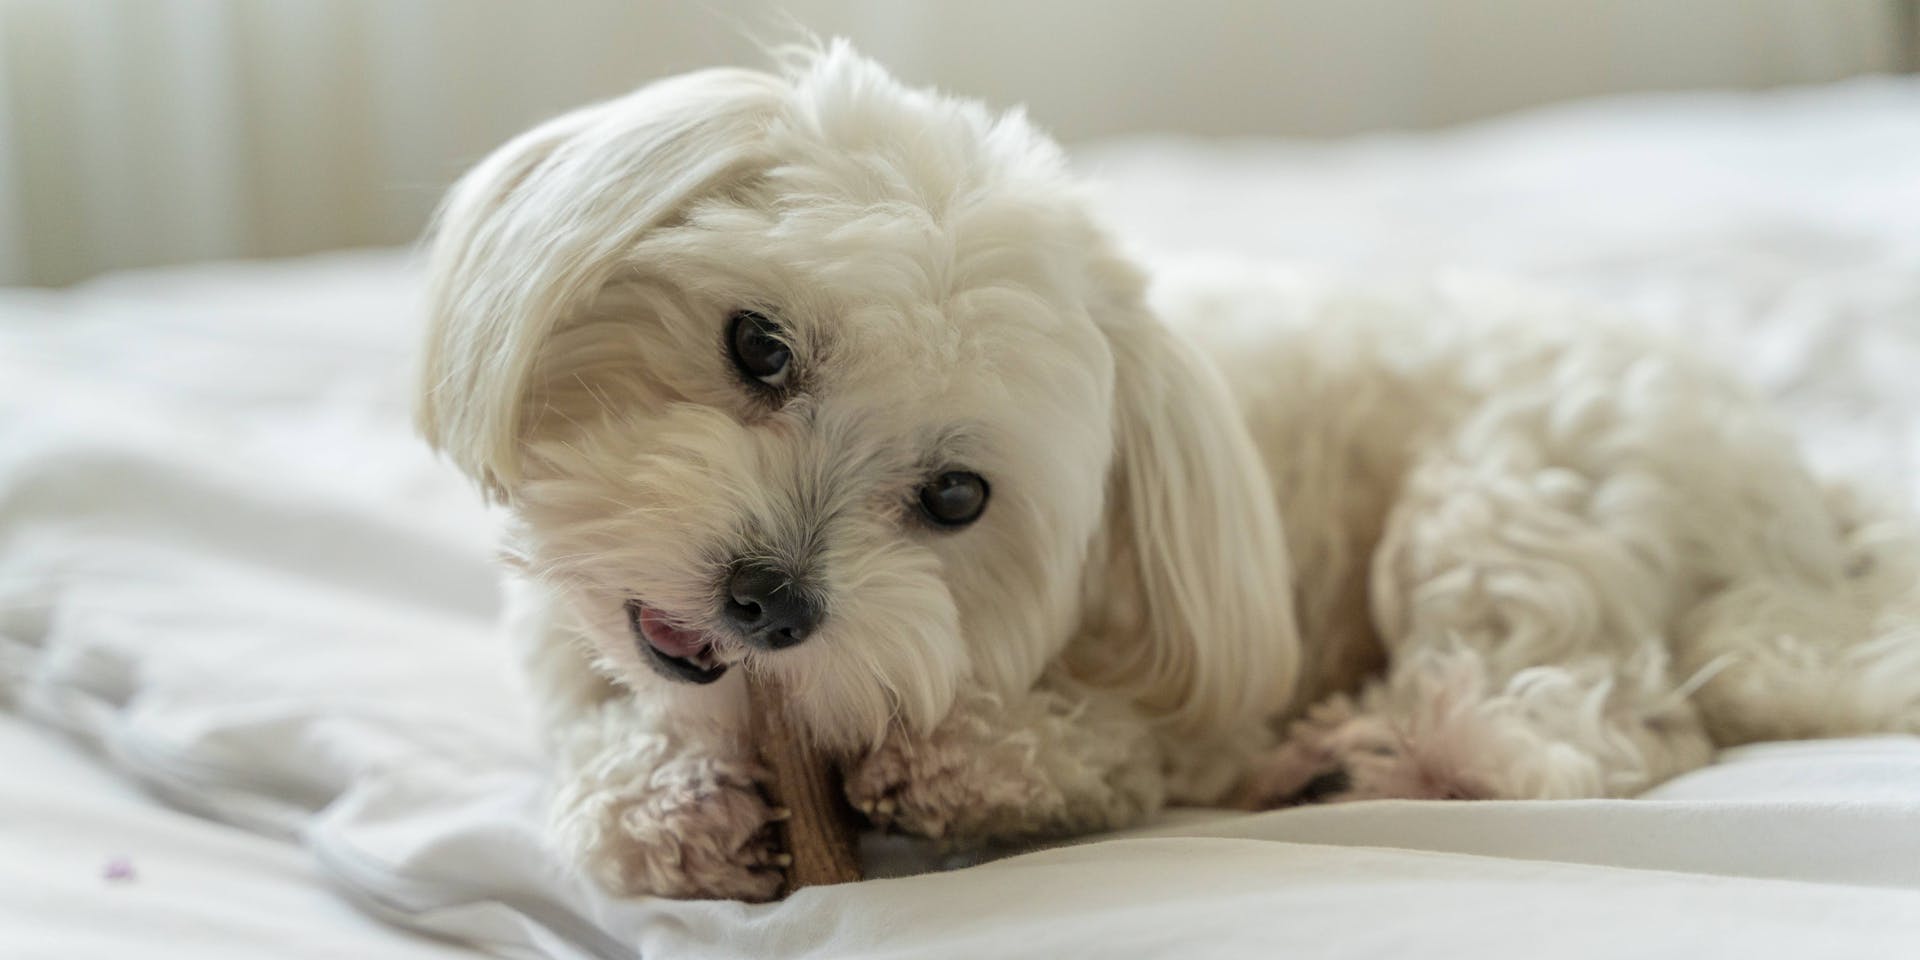 A white dog chewing a treat on a bed.